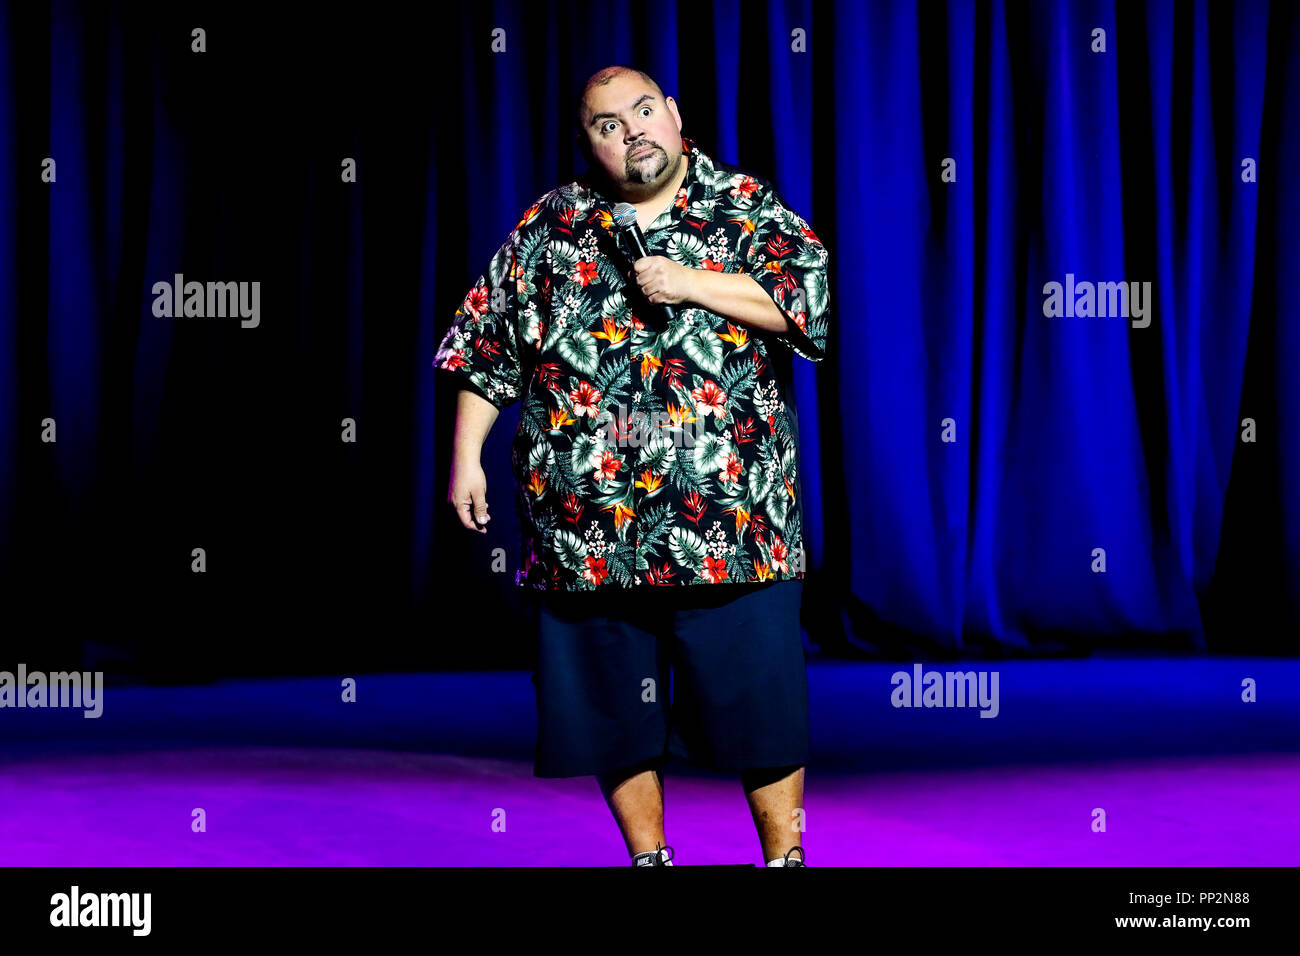 Comedian GABRIEL IGLESIAS performs in Durham, North Carolina as part of his 2018 Tour.   Gabriel Jesus Iglesias, known comically as Fluffy, is an American comedian, actor, writer, producer and voice actor. He is known for his shows I'm Not Fat I'm Fluffy and Hot & Fluffy. Stock Photo